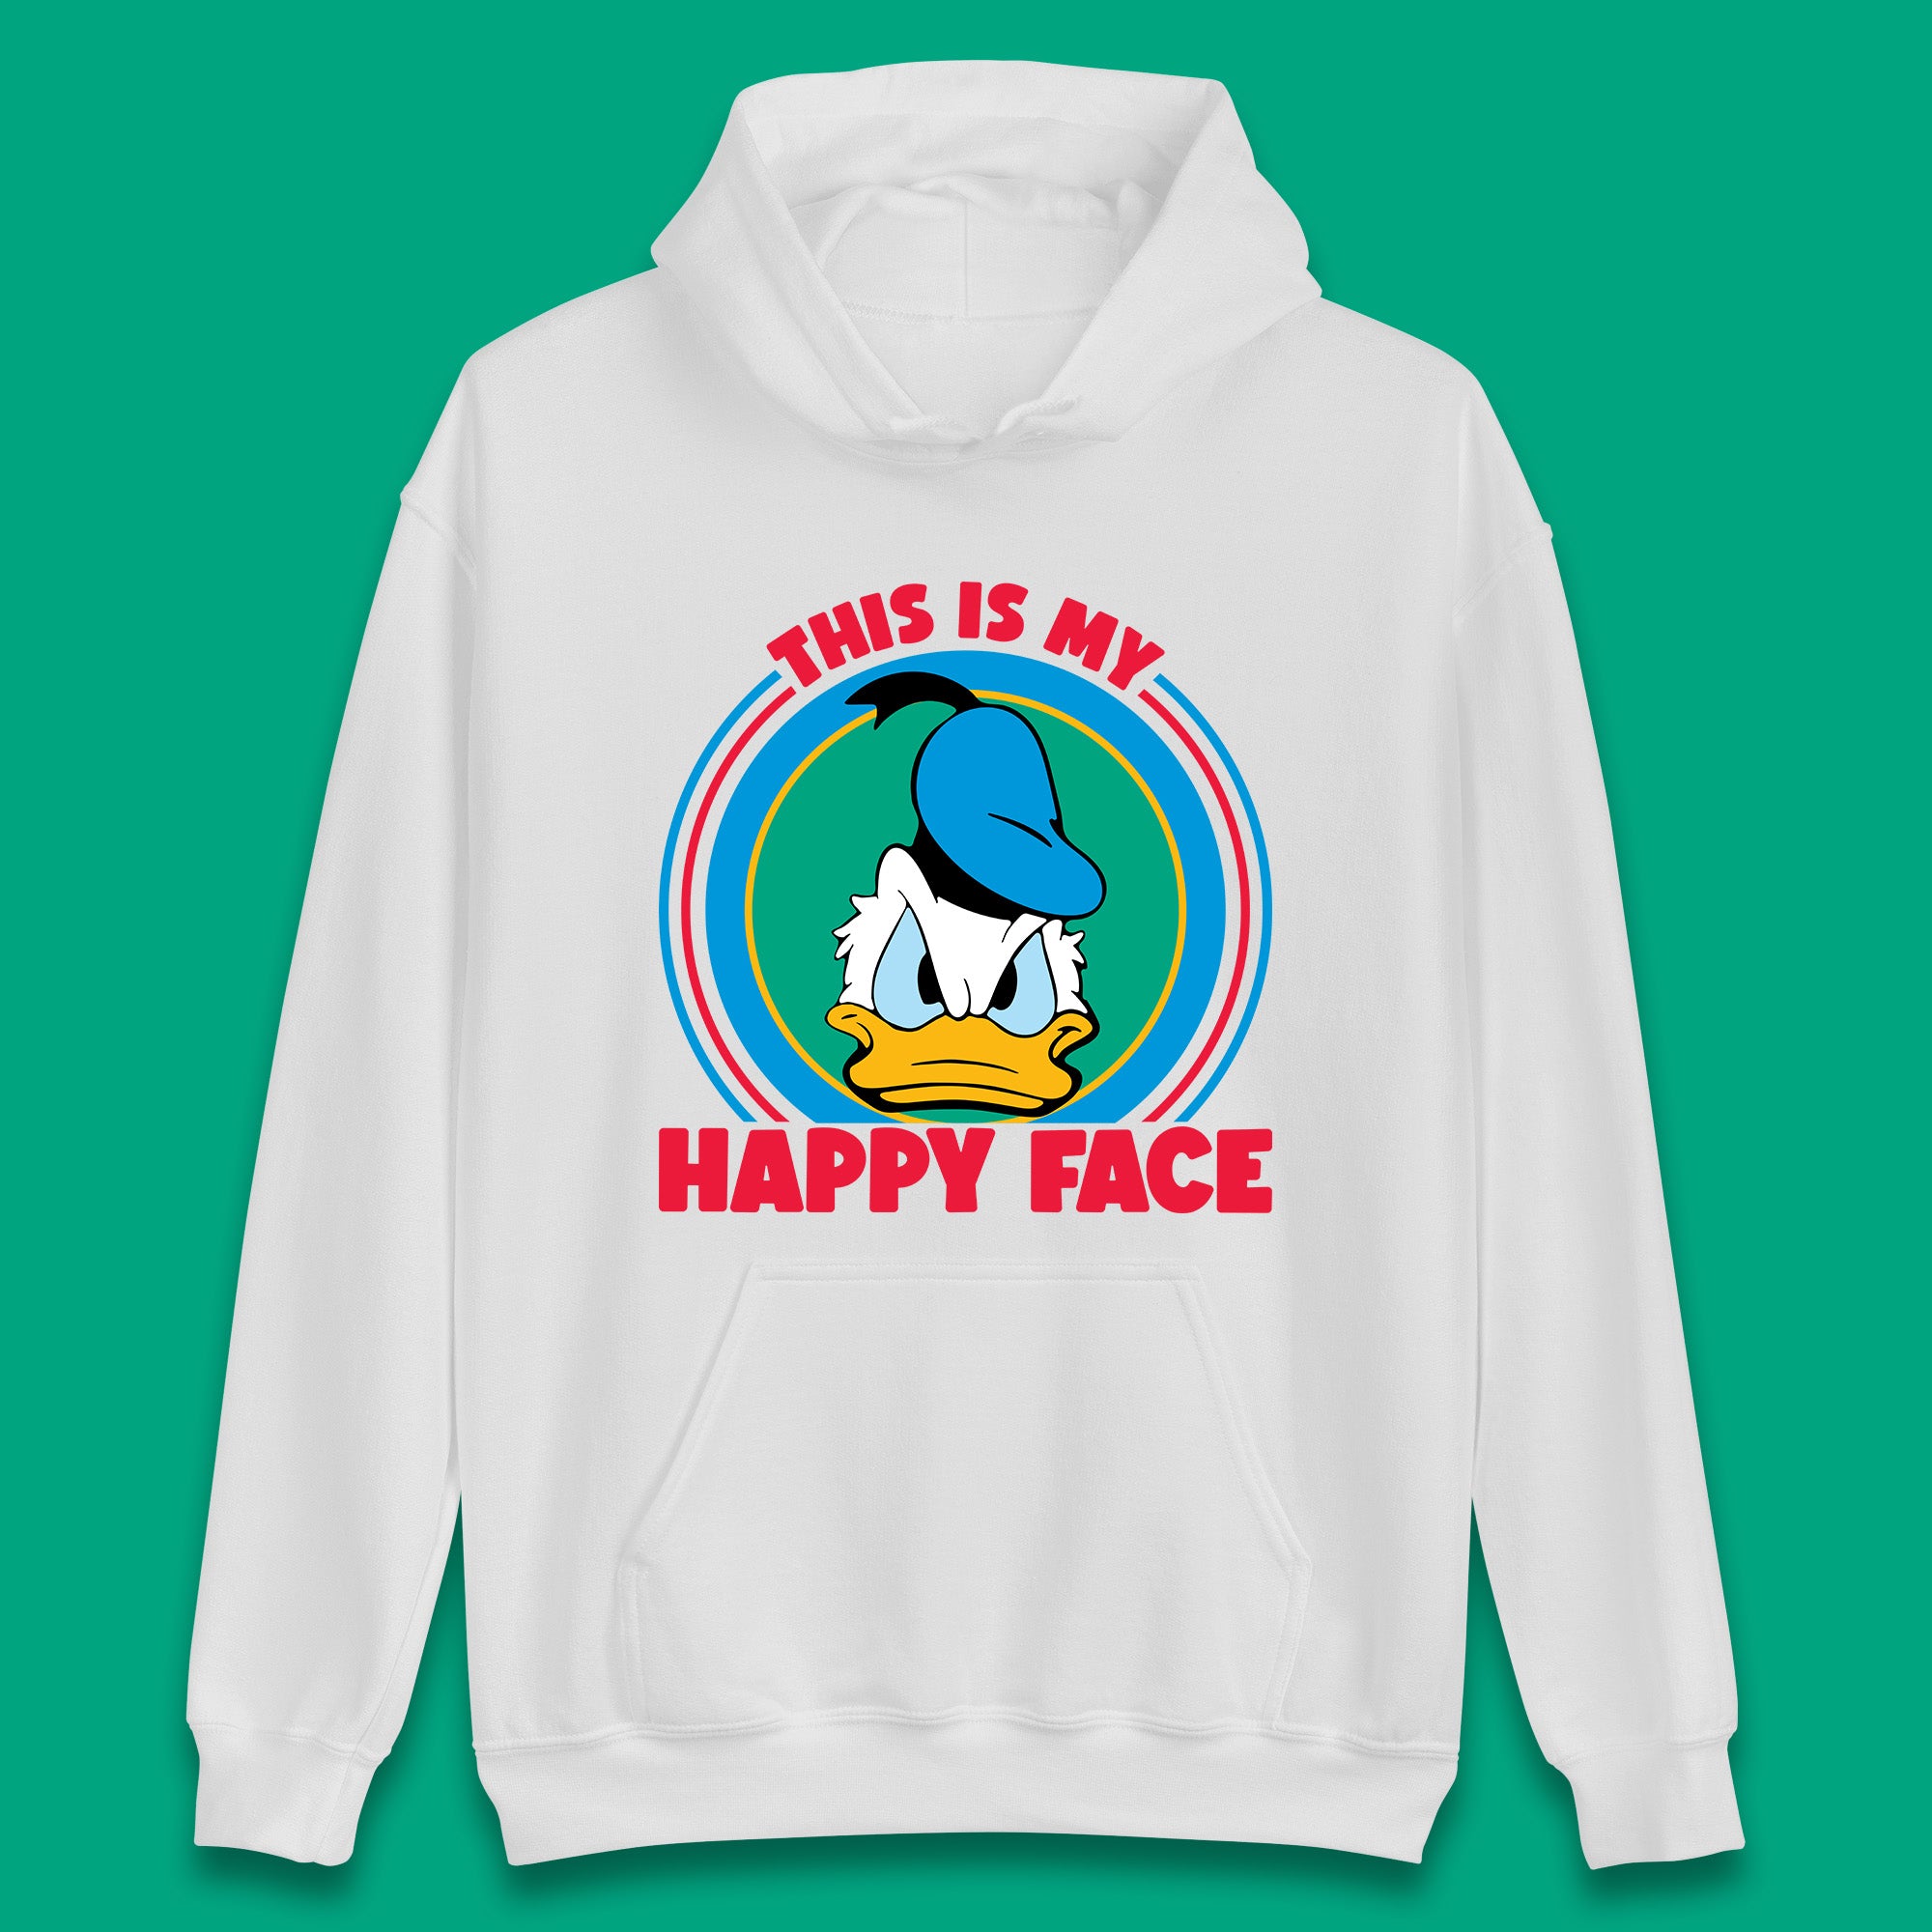 This Is My Happy Face Donald Duck Funny Animated Cartoon Character Angry Duck Disneyland Trip Disney Vacations Unisex Hoodie